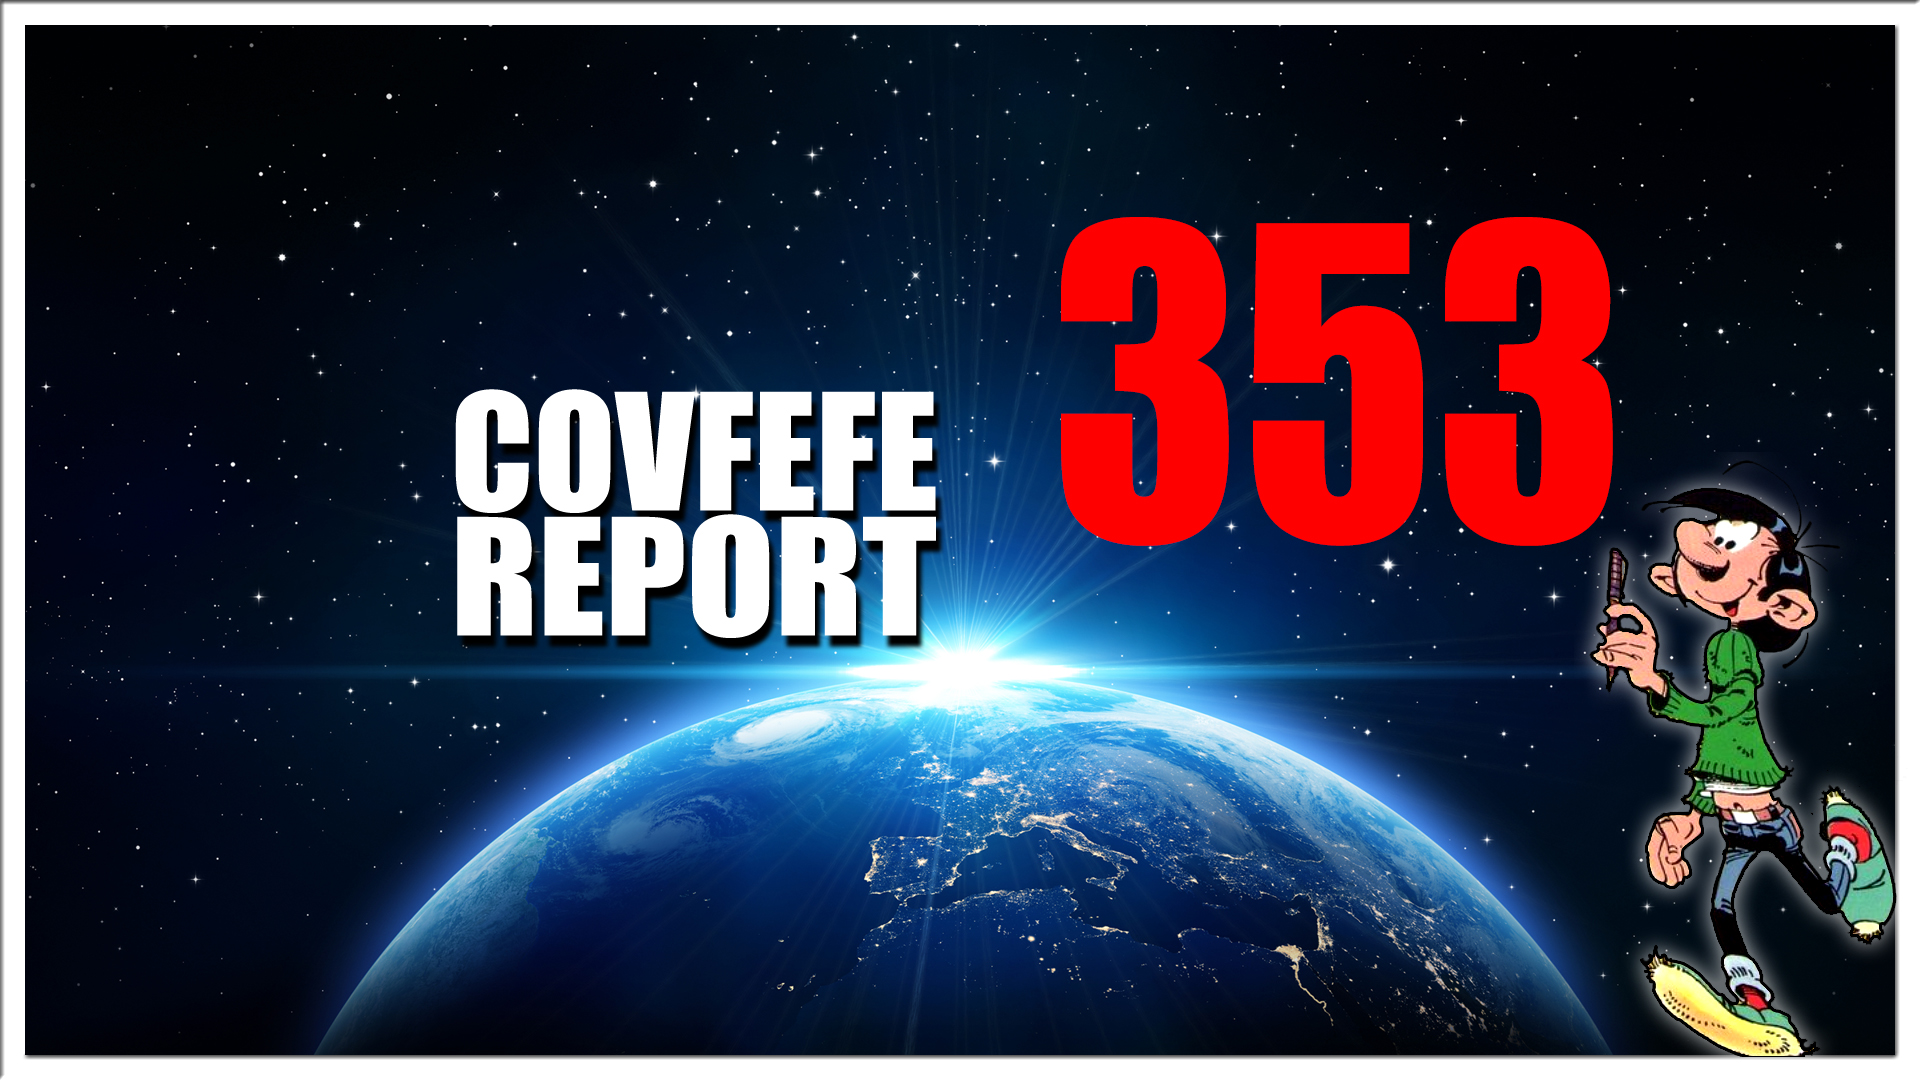 Covfefe Report 353. Brexit not done, Eagle on ice, Judy Shelton, Geshifft, Kevin Spacey, Baybasin